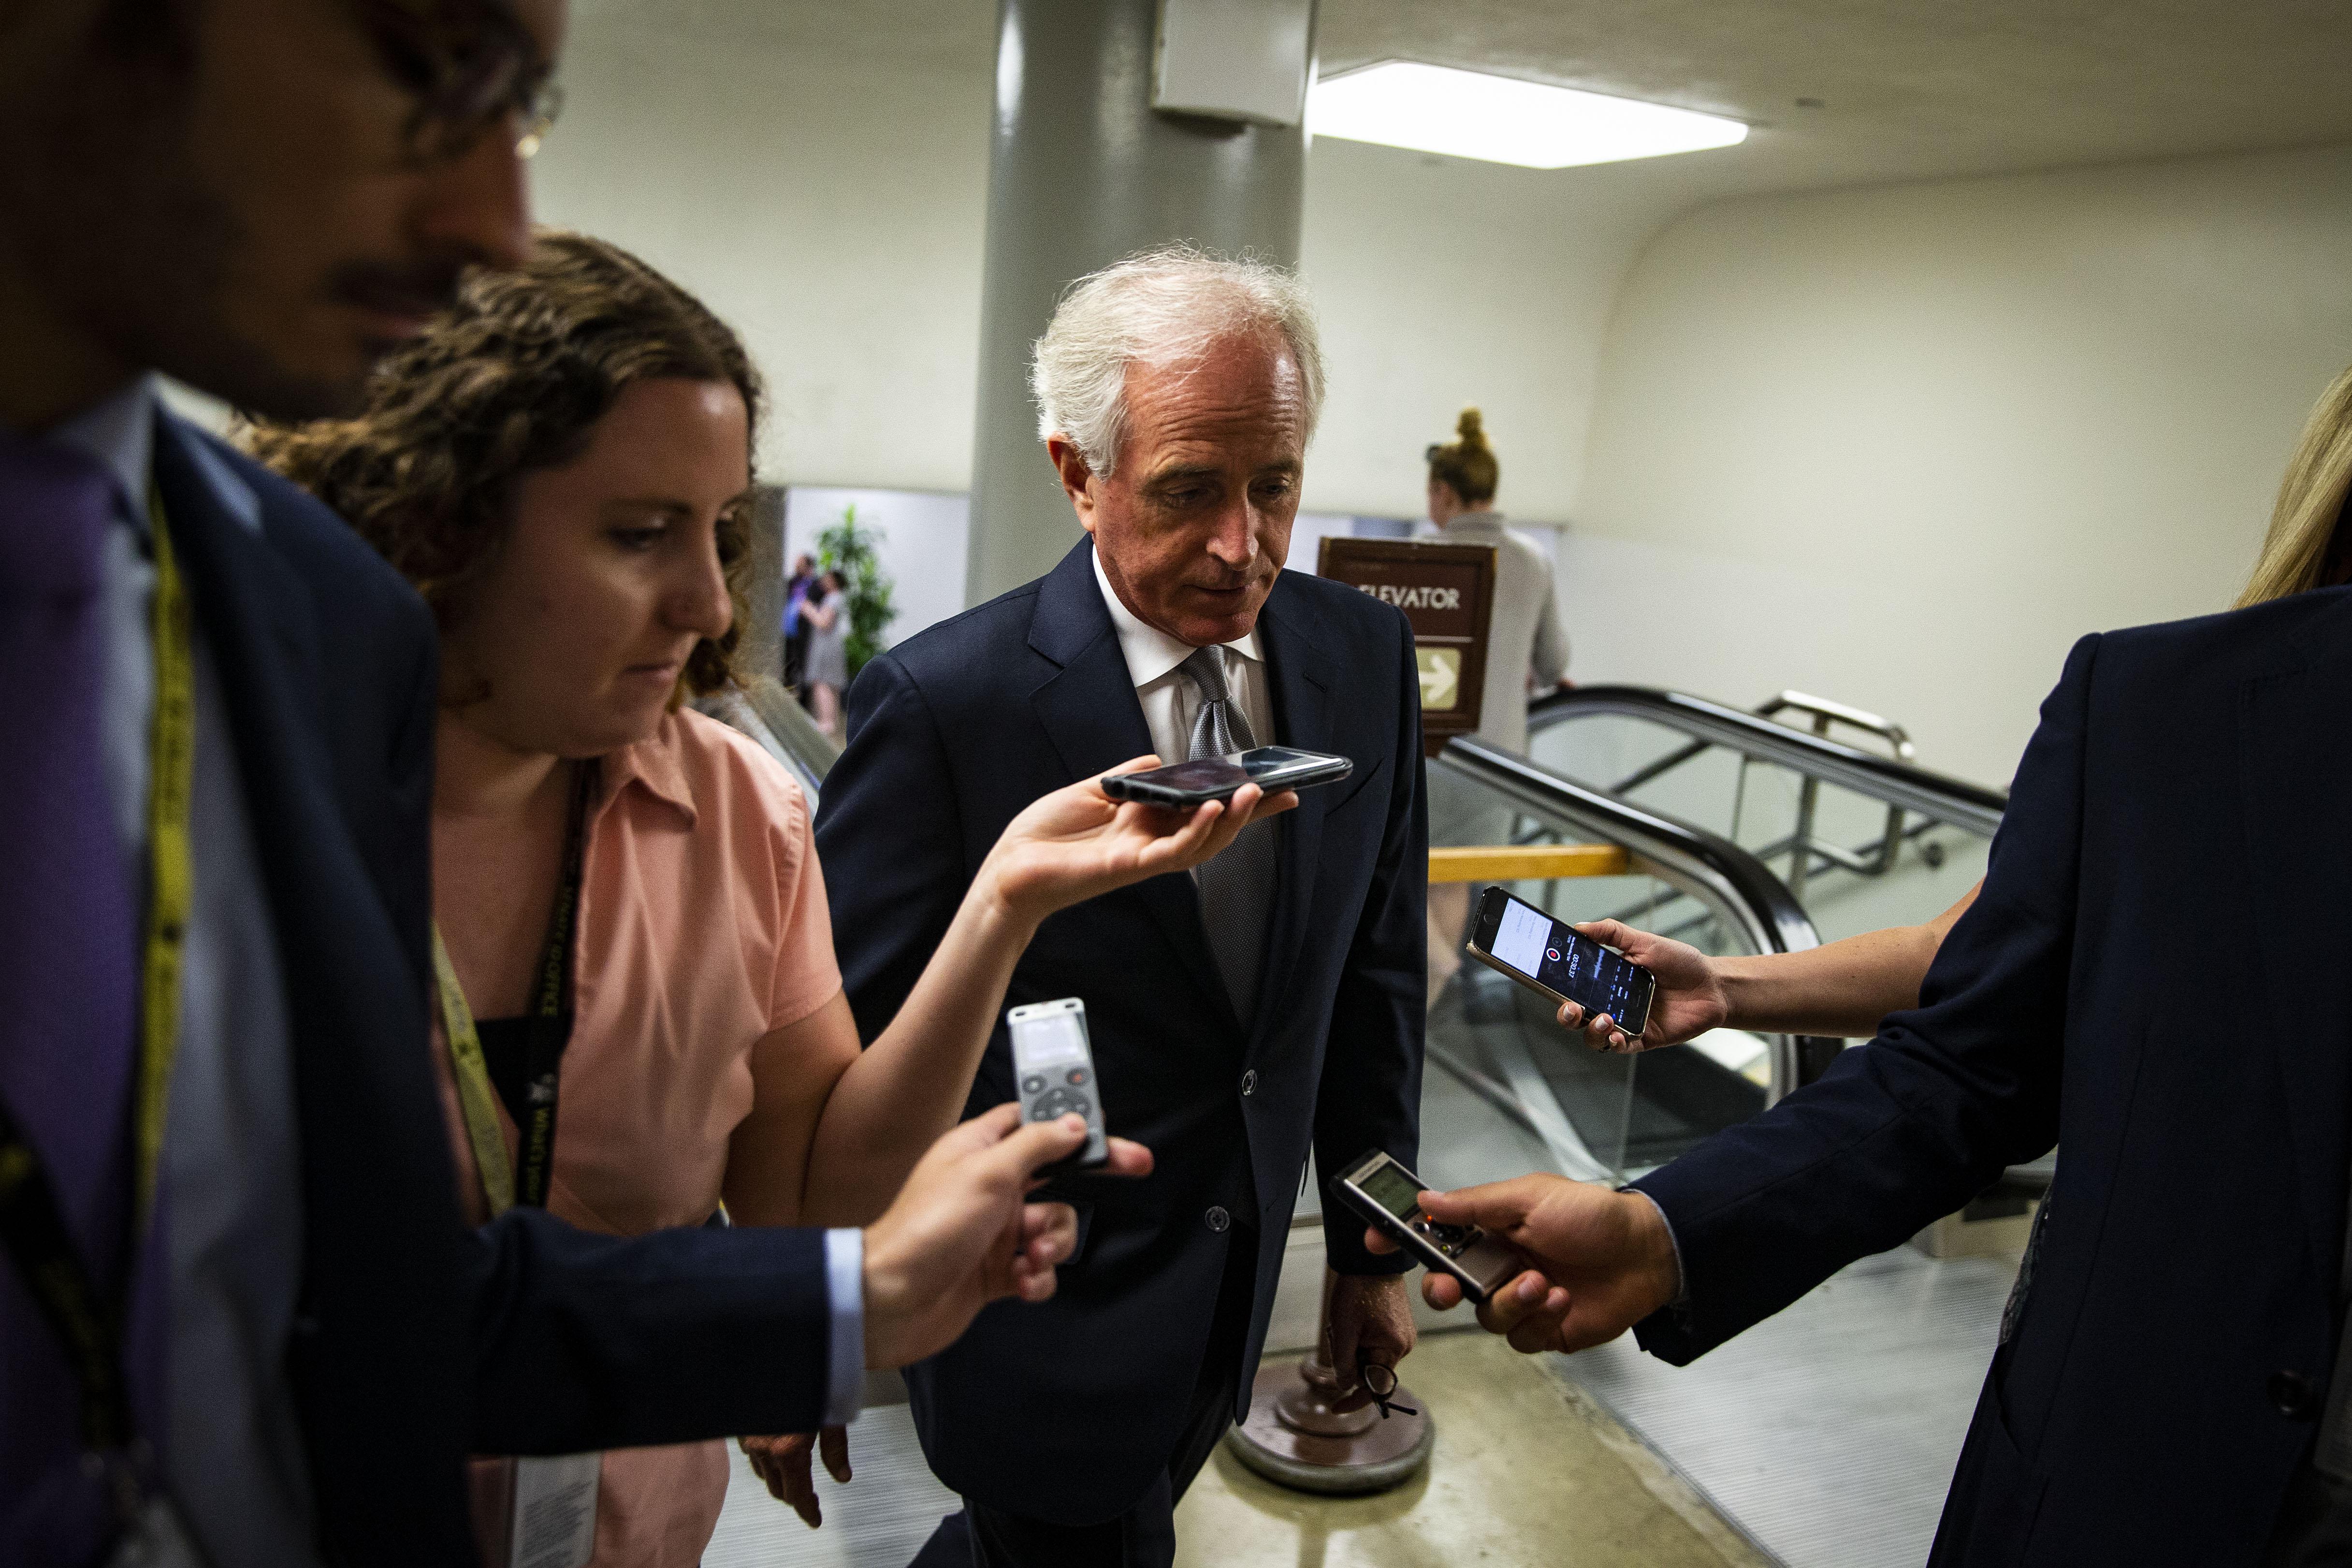 WASHINGTON, DC - JULY 10: Sen. Bob Corker (R-TN) speaks to reporters as he heads to the weekly Senate Republicans policy luncheon, on Capitol Hill, on July 10, 2018 in Washington, DC. (Photo by Al Drago/Getty Images)